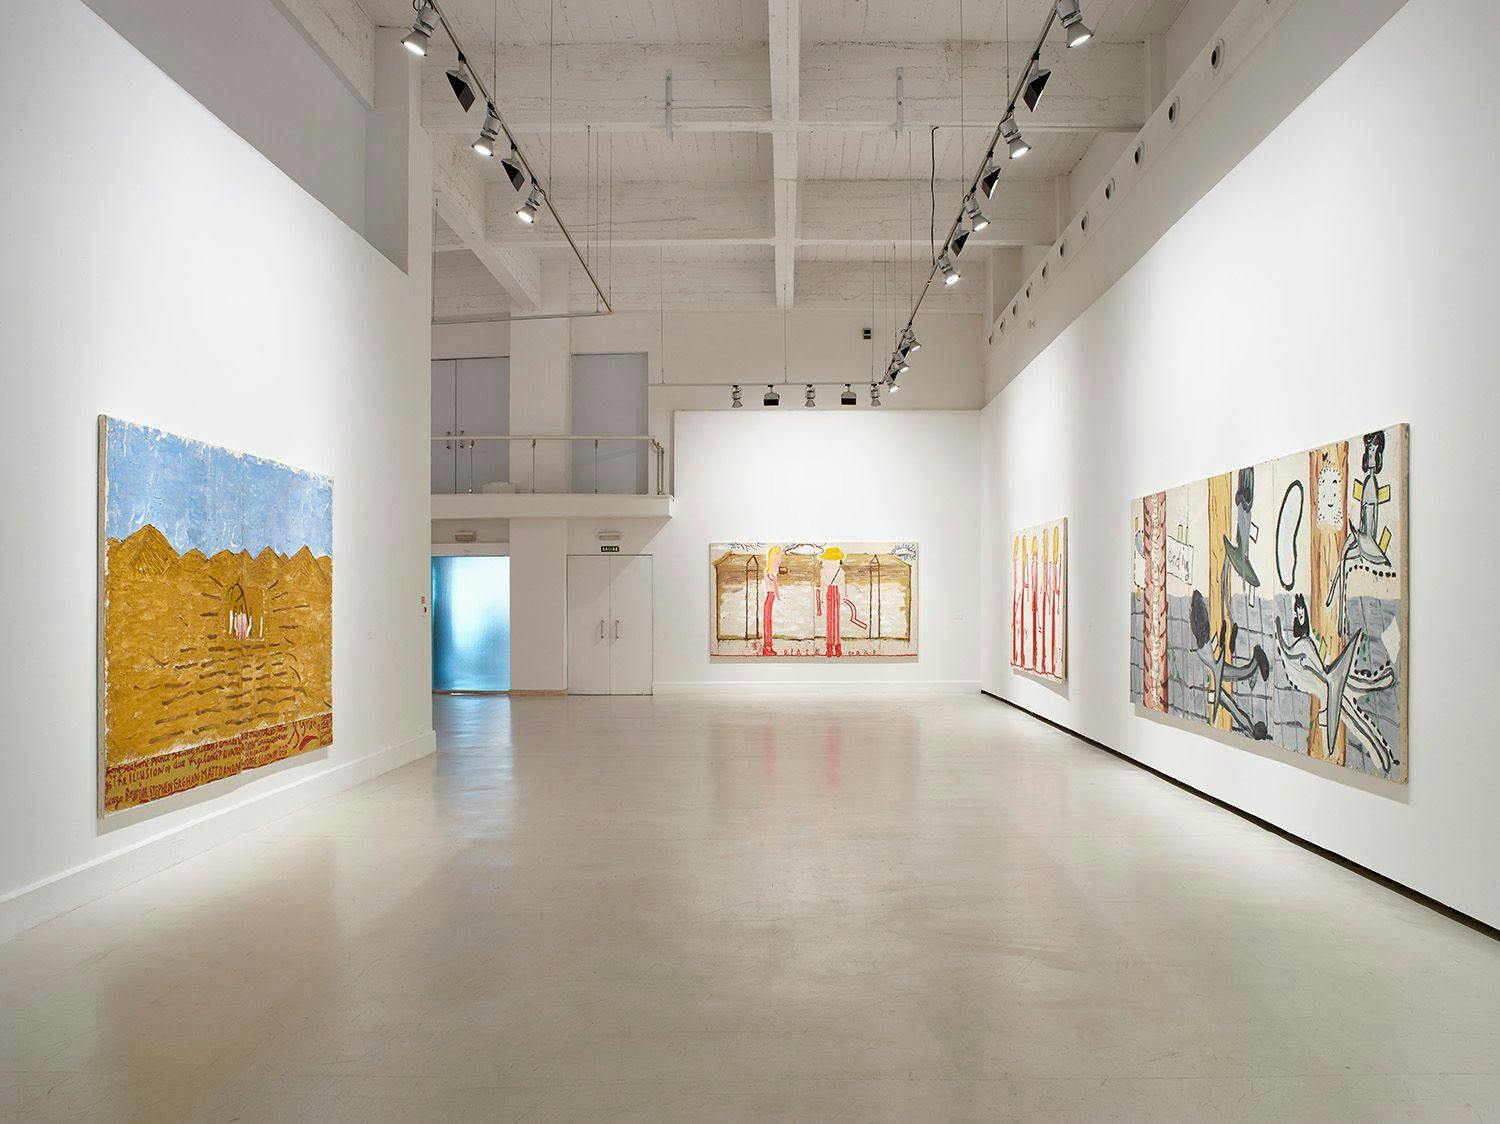 Installation view of the exhibition, Rose Wylie: Hullo Hullo..., at CAC Málaga in Málaga, dated 2018.